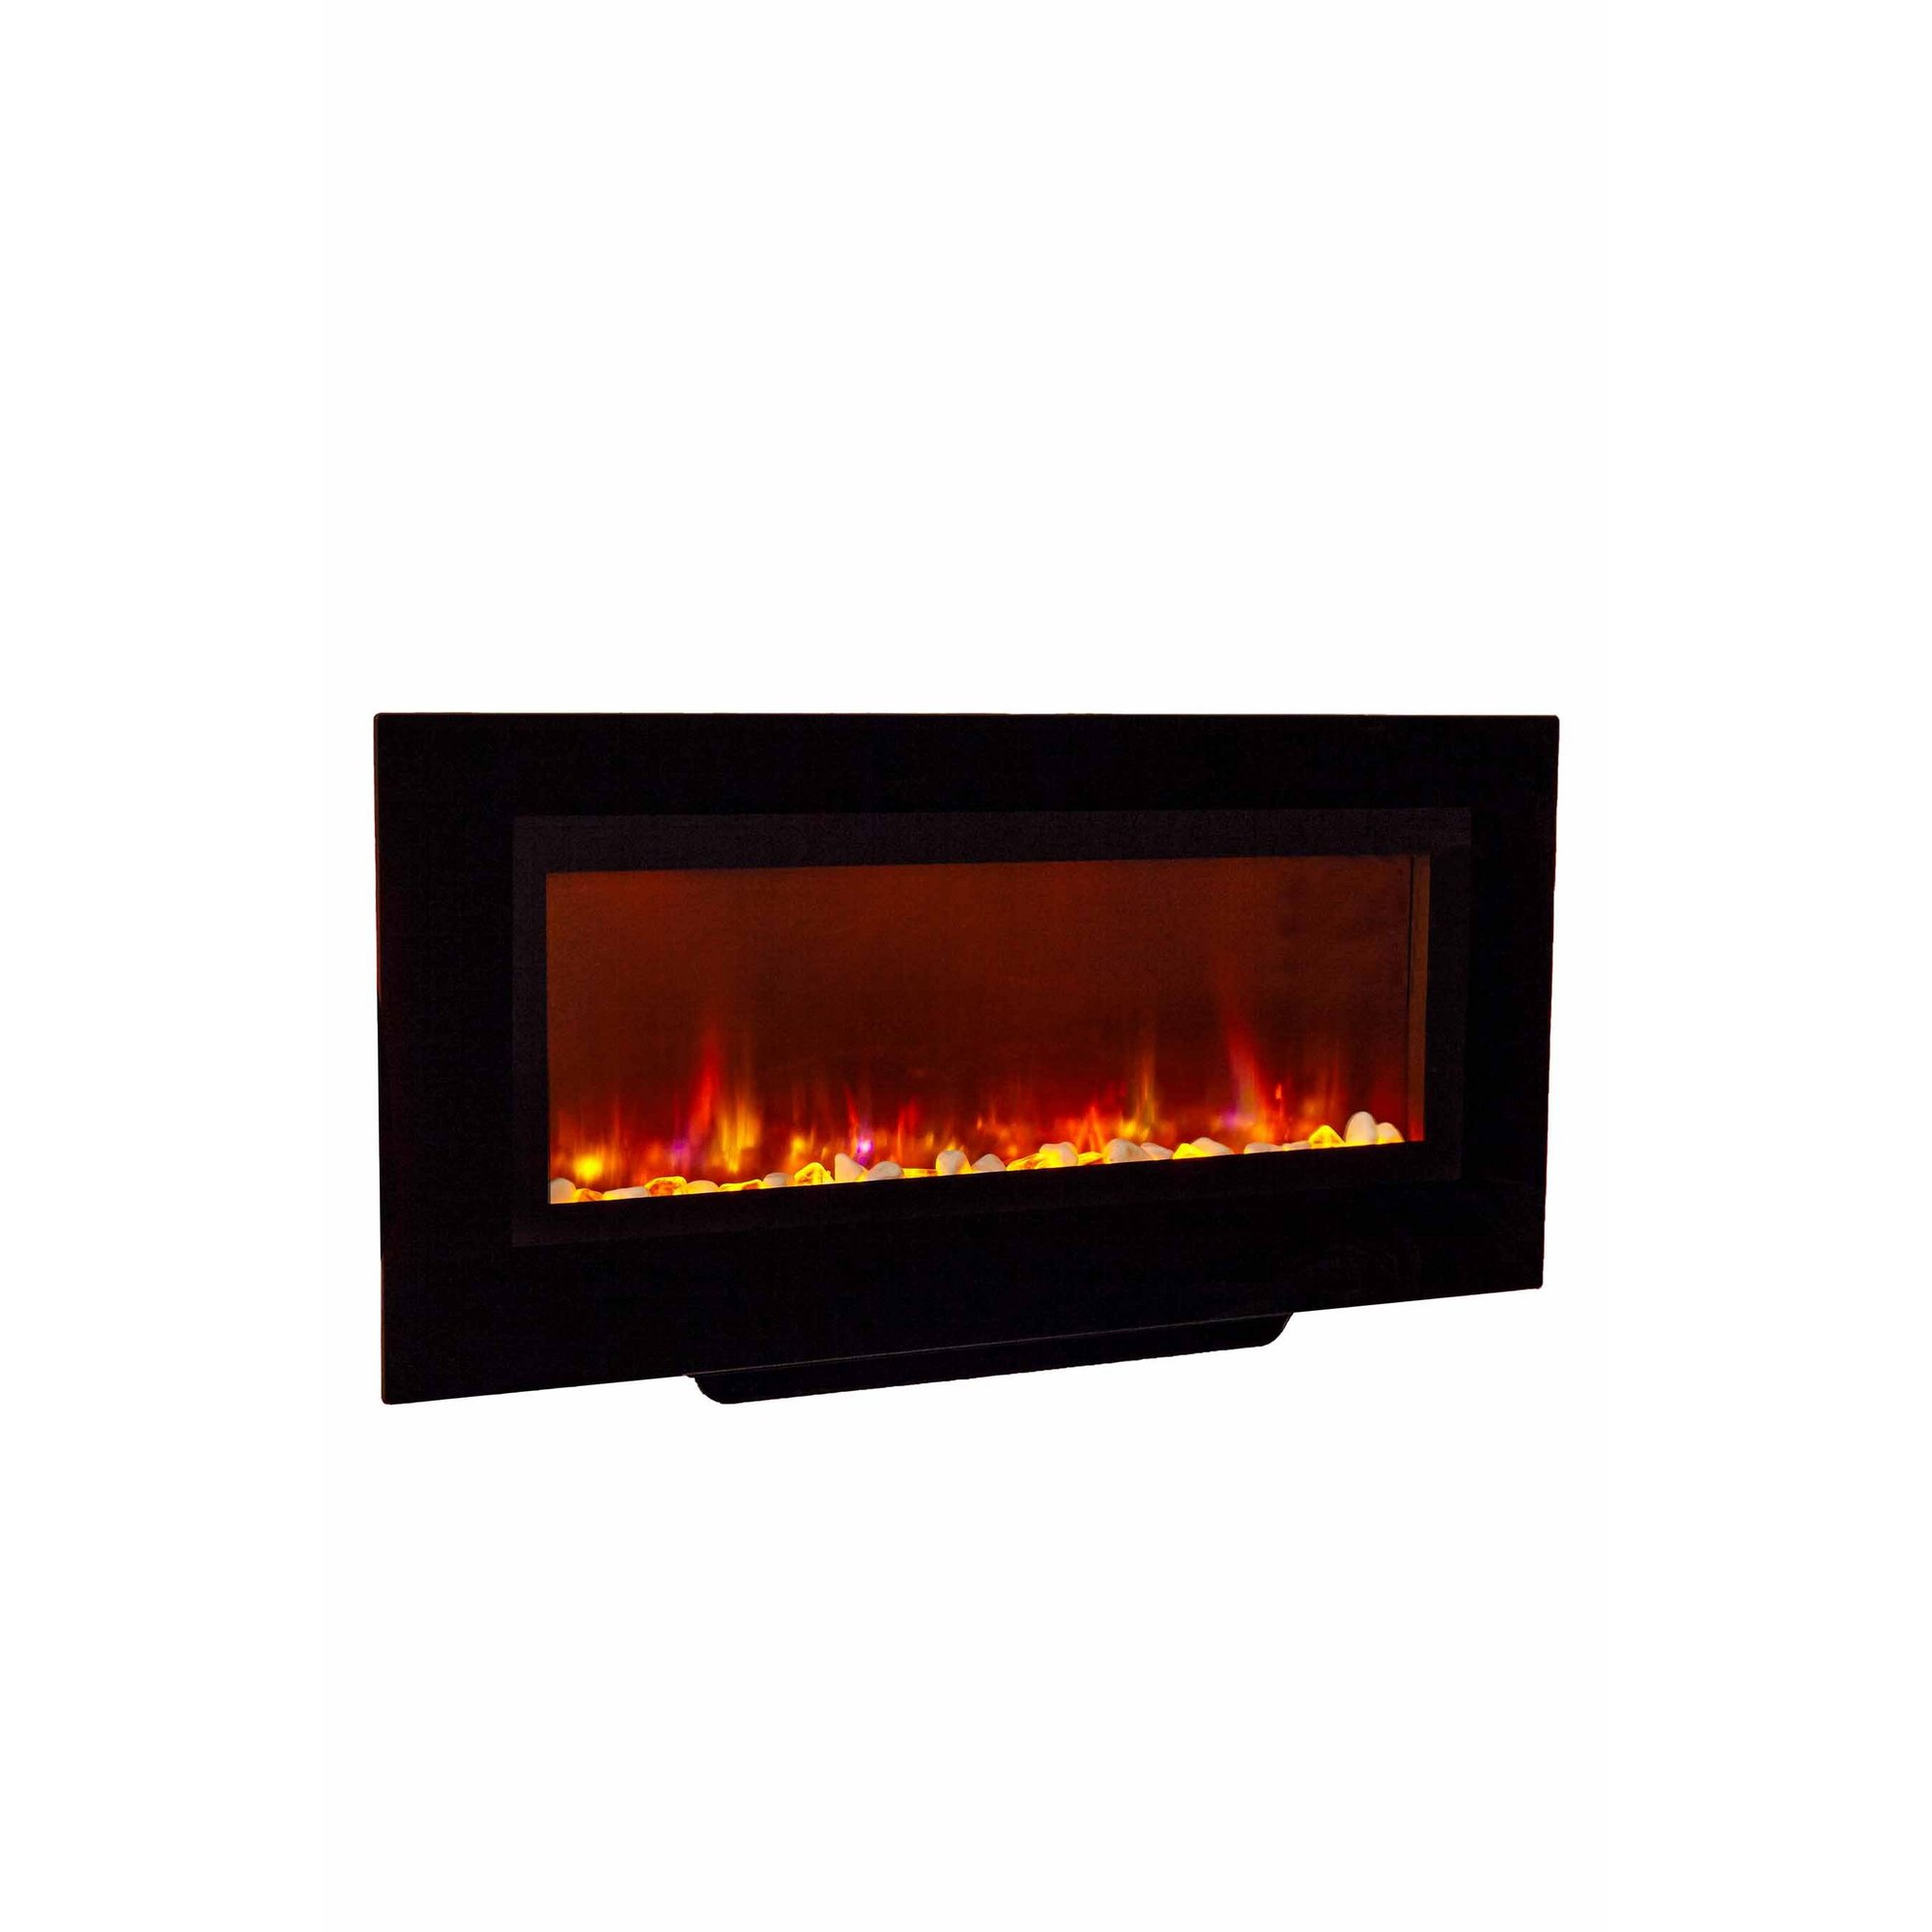 Suncrest 38 Inch Santos Wall Mounted Electric Fire